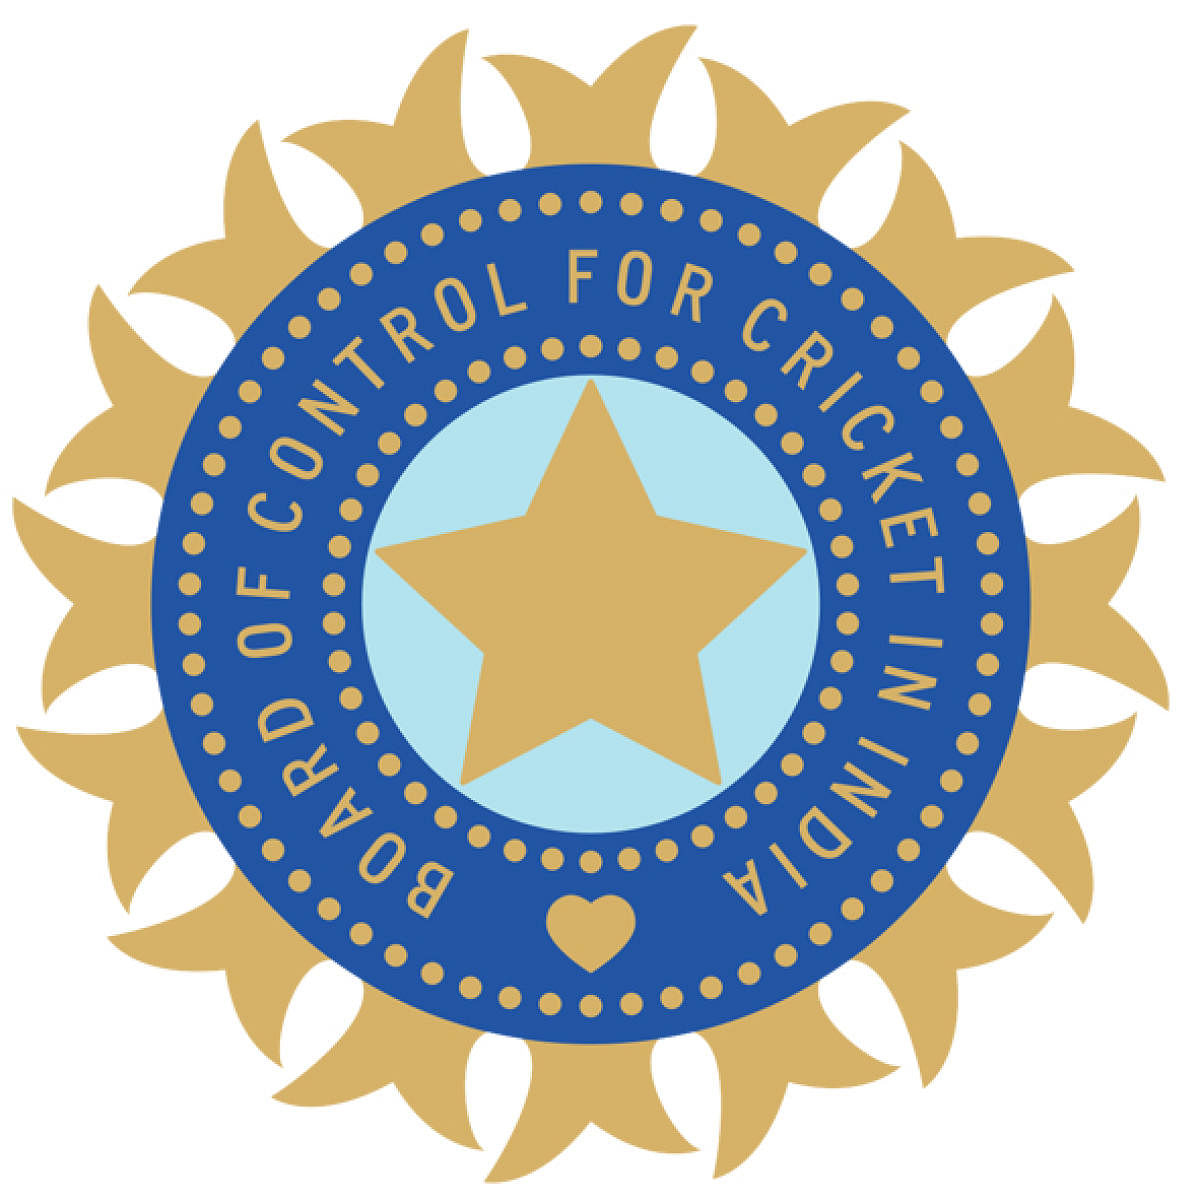 BCCI has denied any irregularity in the payments saying all necessary procedure was followed.